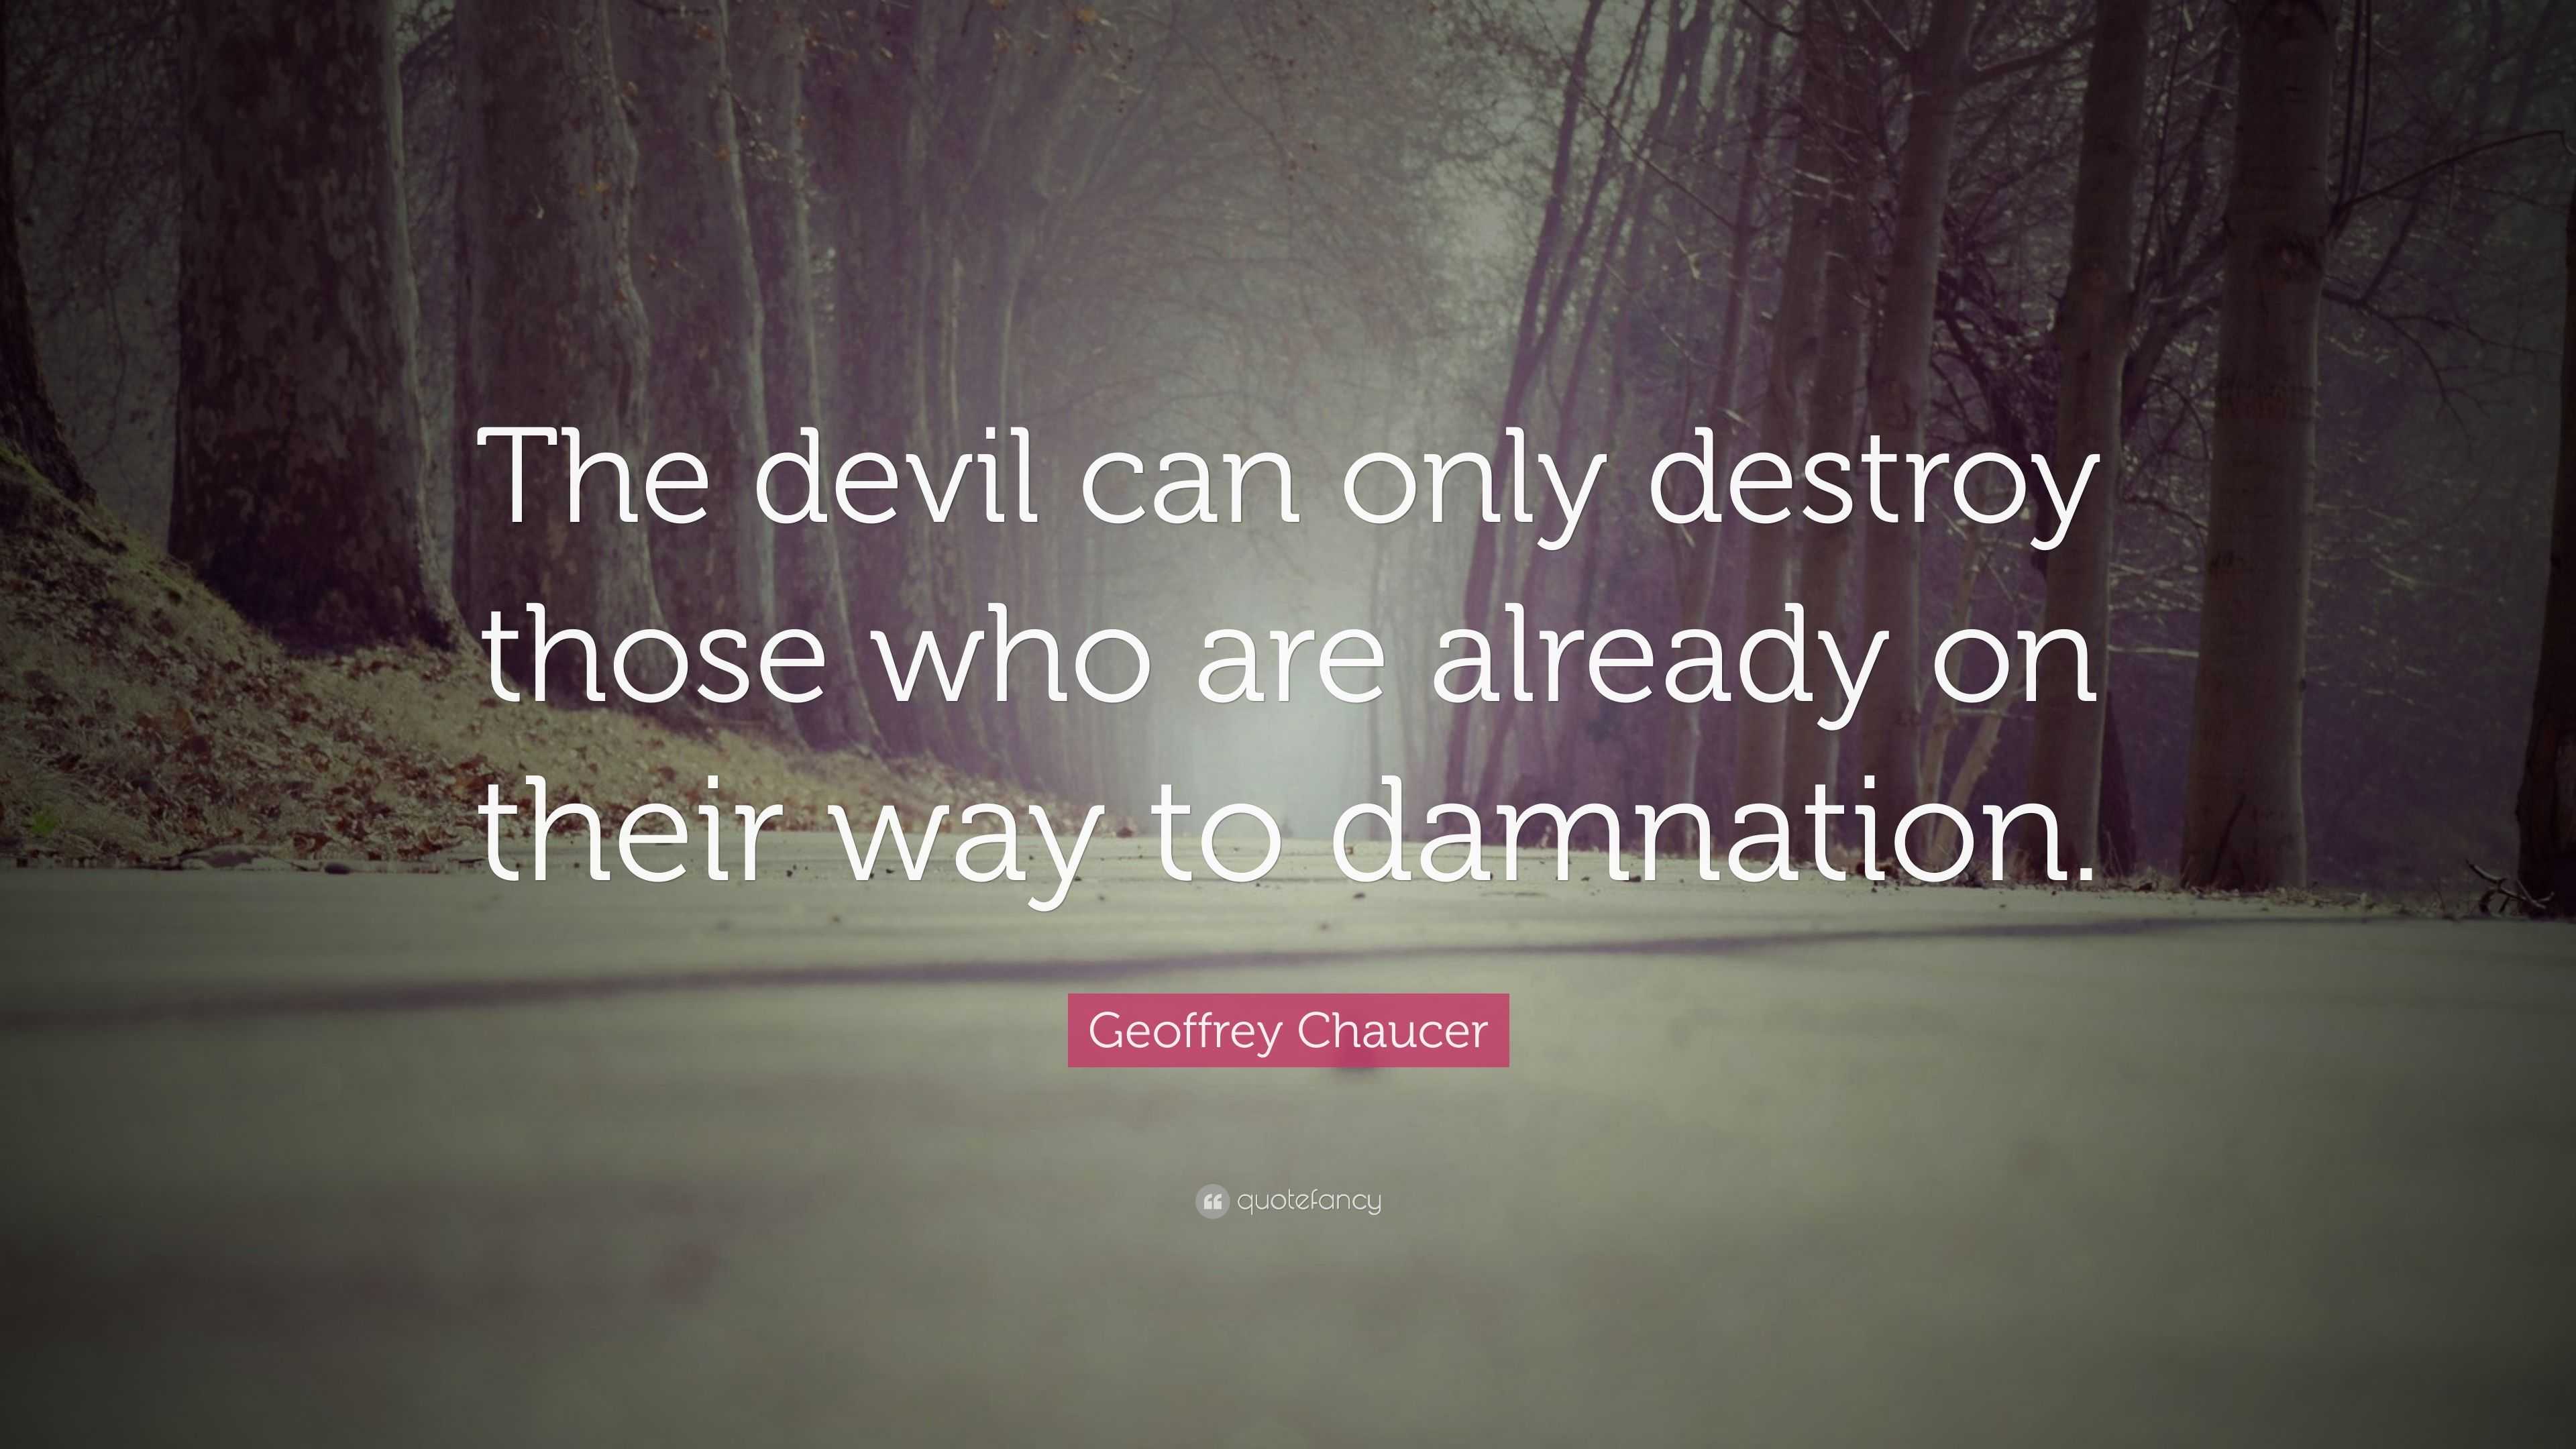 Geoffrey Chaucer Quote: “The devil can only destroy those who are